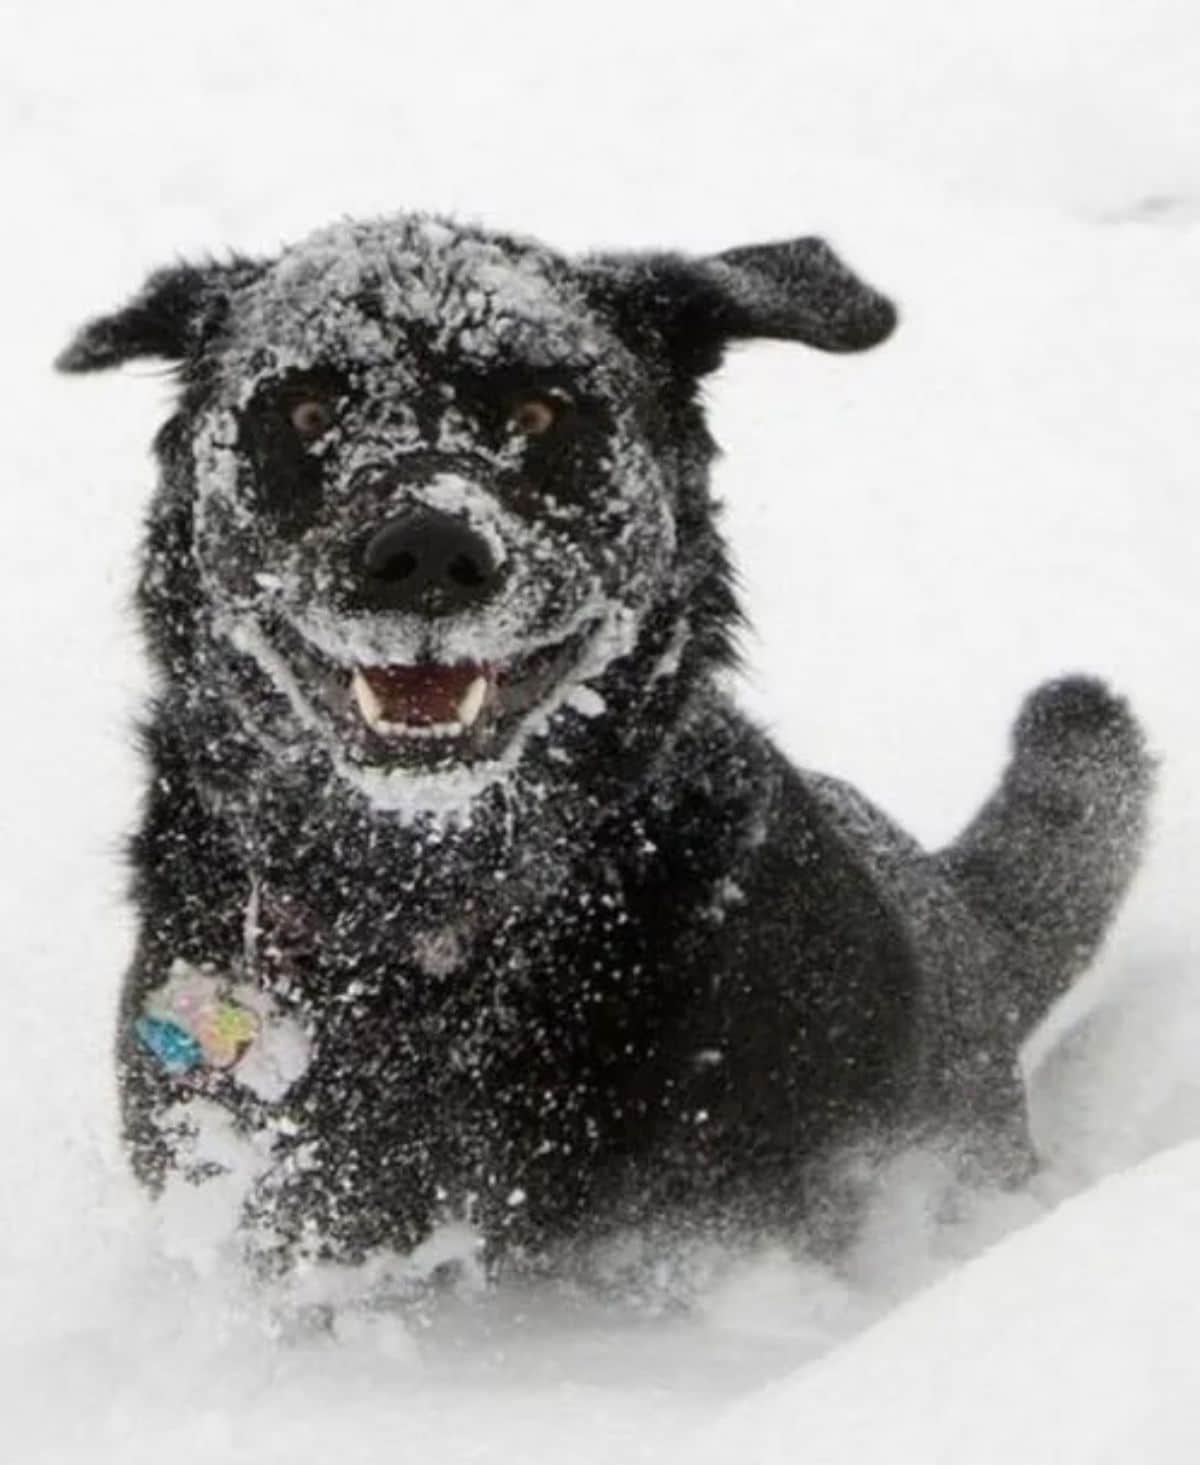 black dog standing in snow and is covered in snow